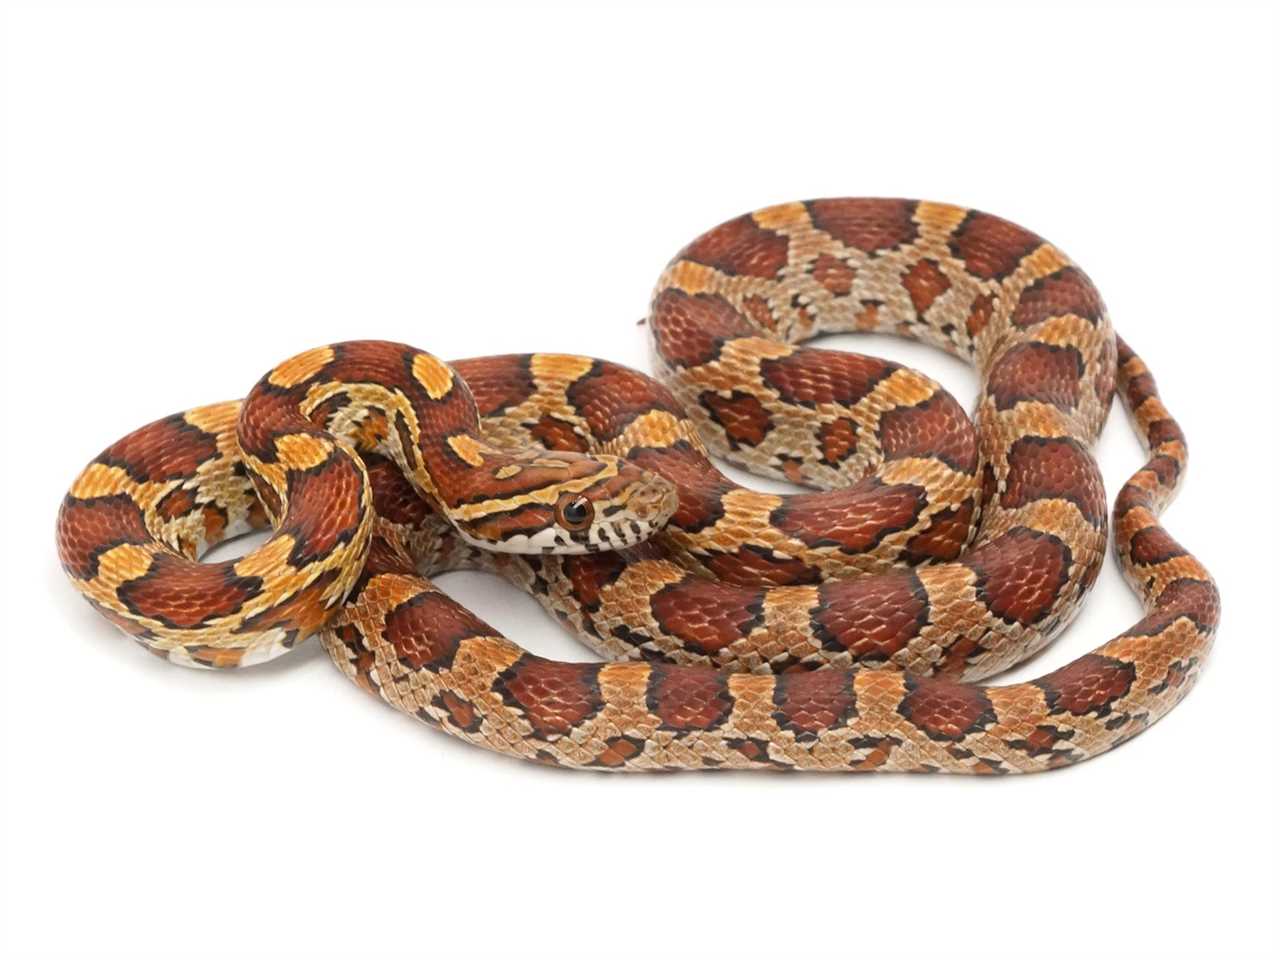 Keeping a Normal Corn Snake as a Pet: Proper Care Guide